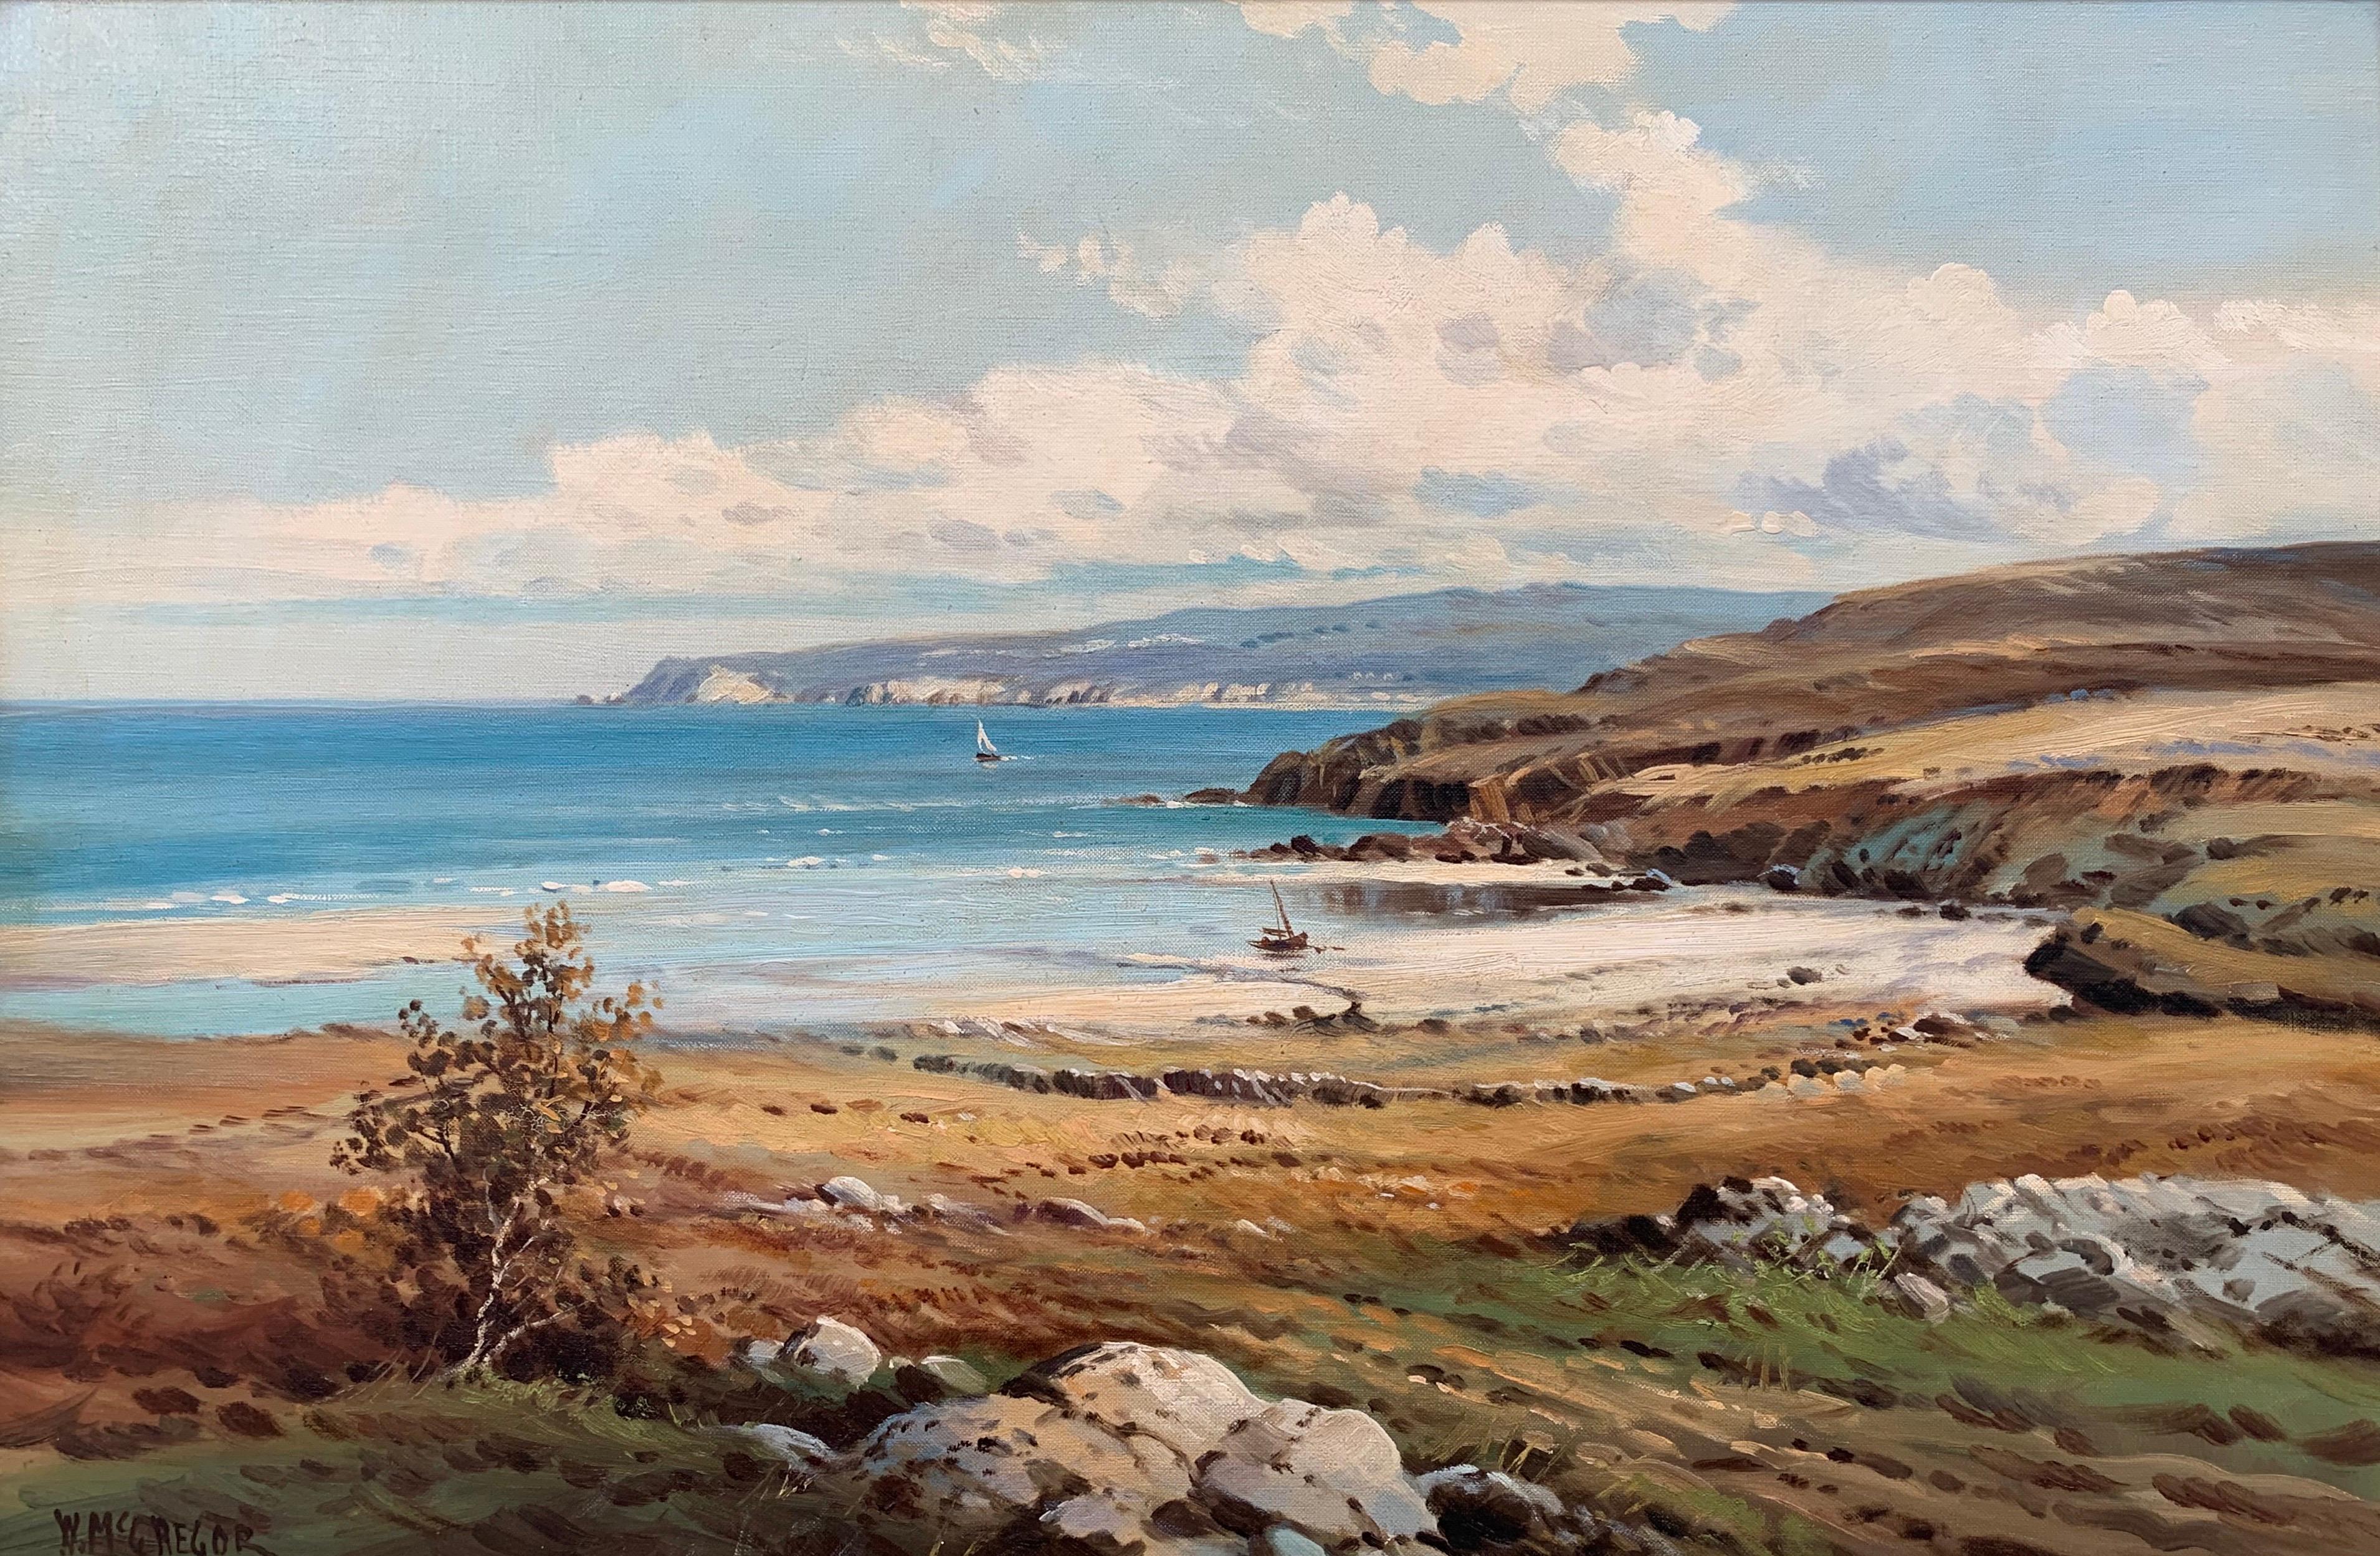 Original Oil Painting of North Coast Scotland Sea Landscape by British Artist - Gray Landscape Painting by William McGregor